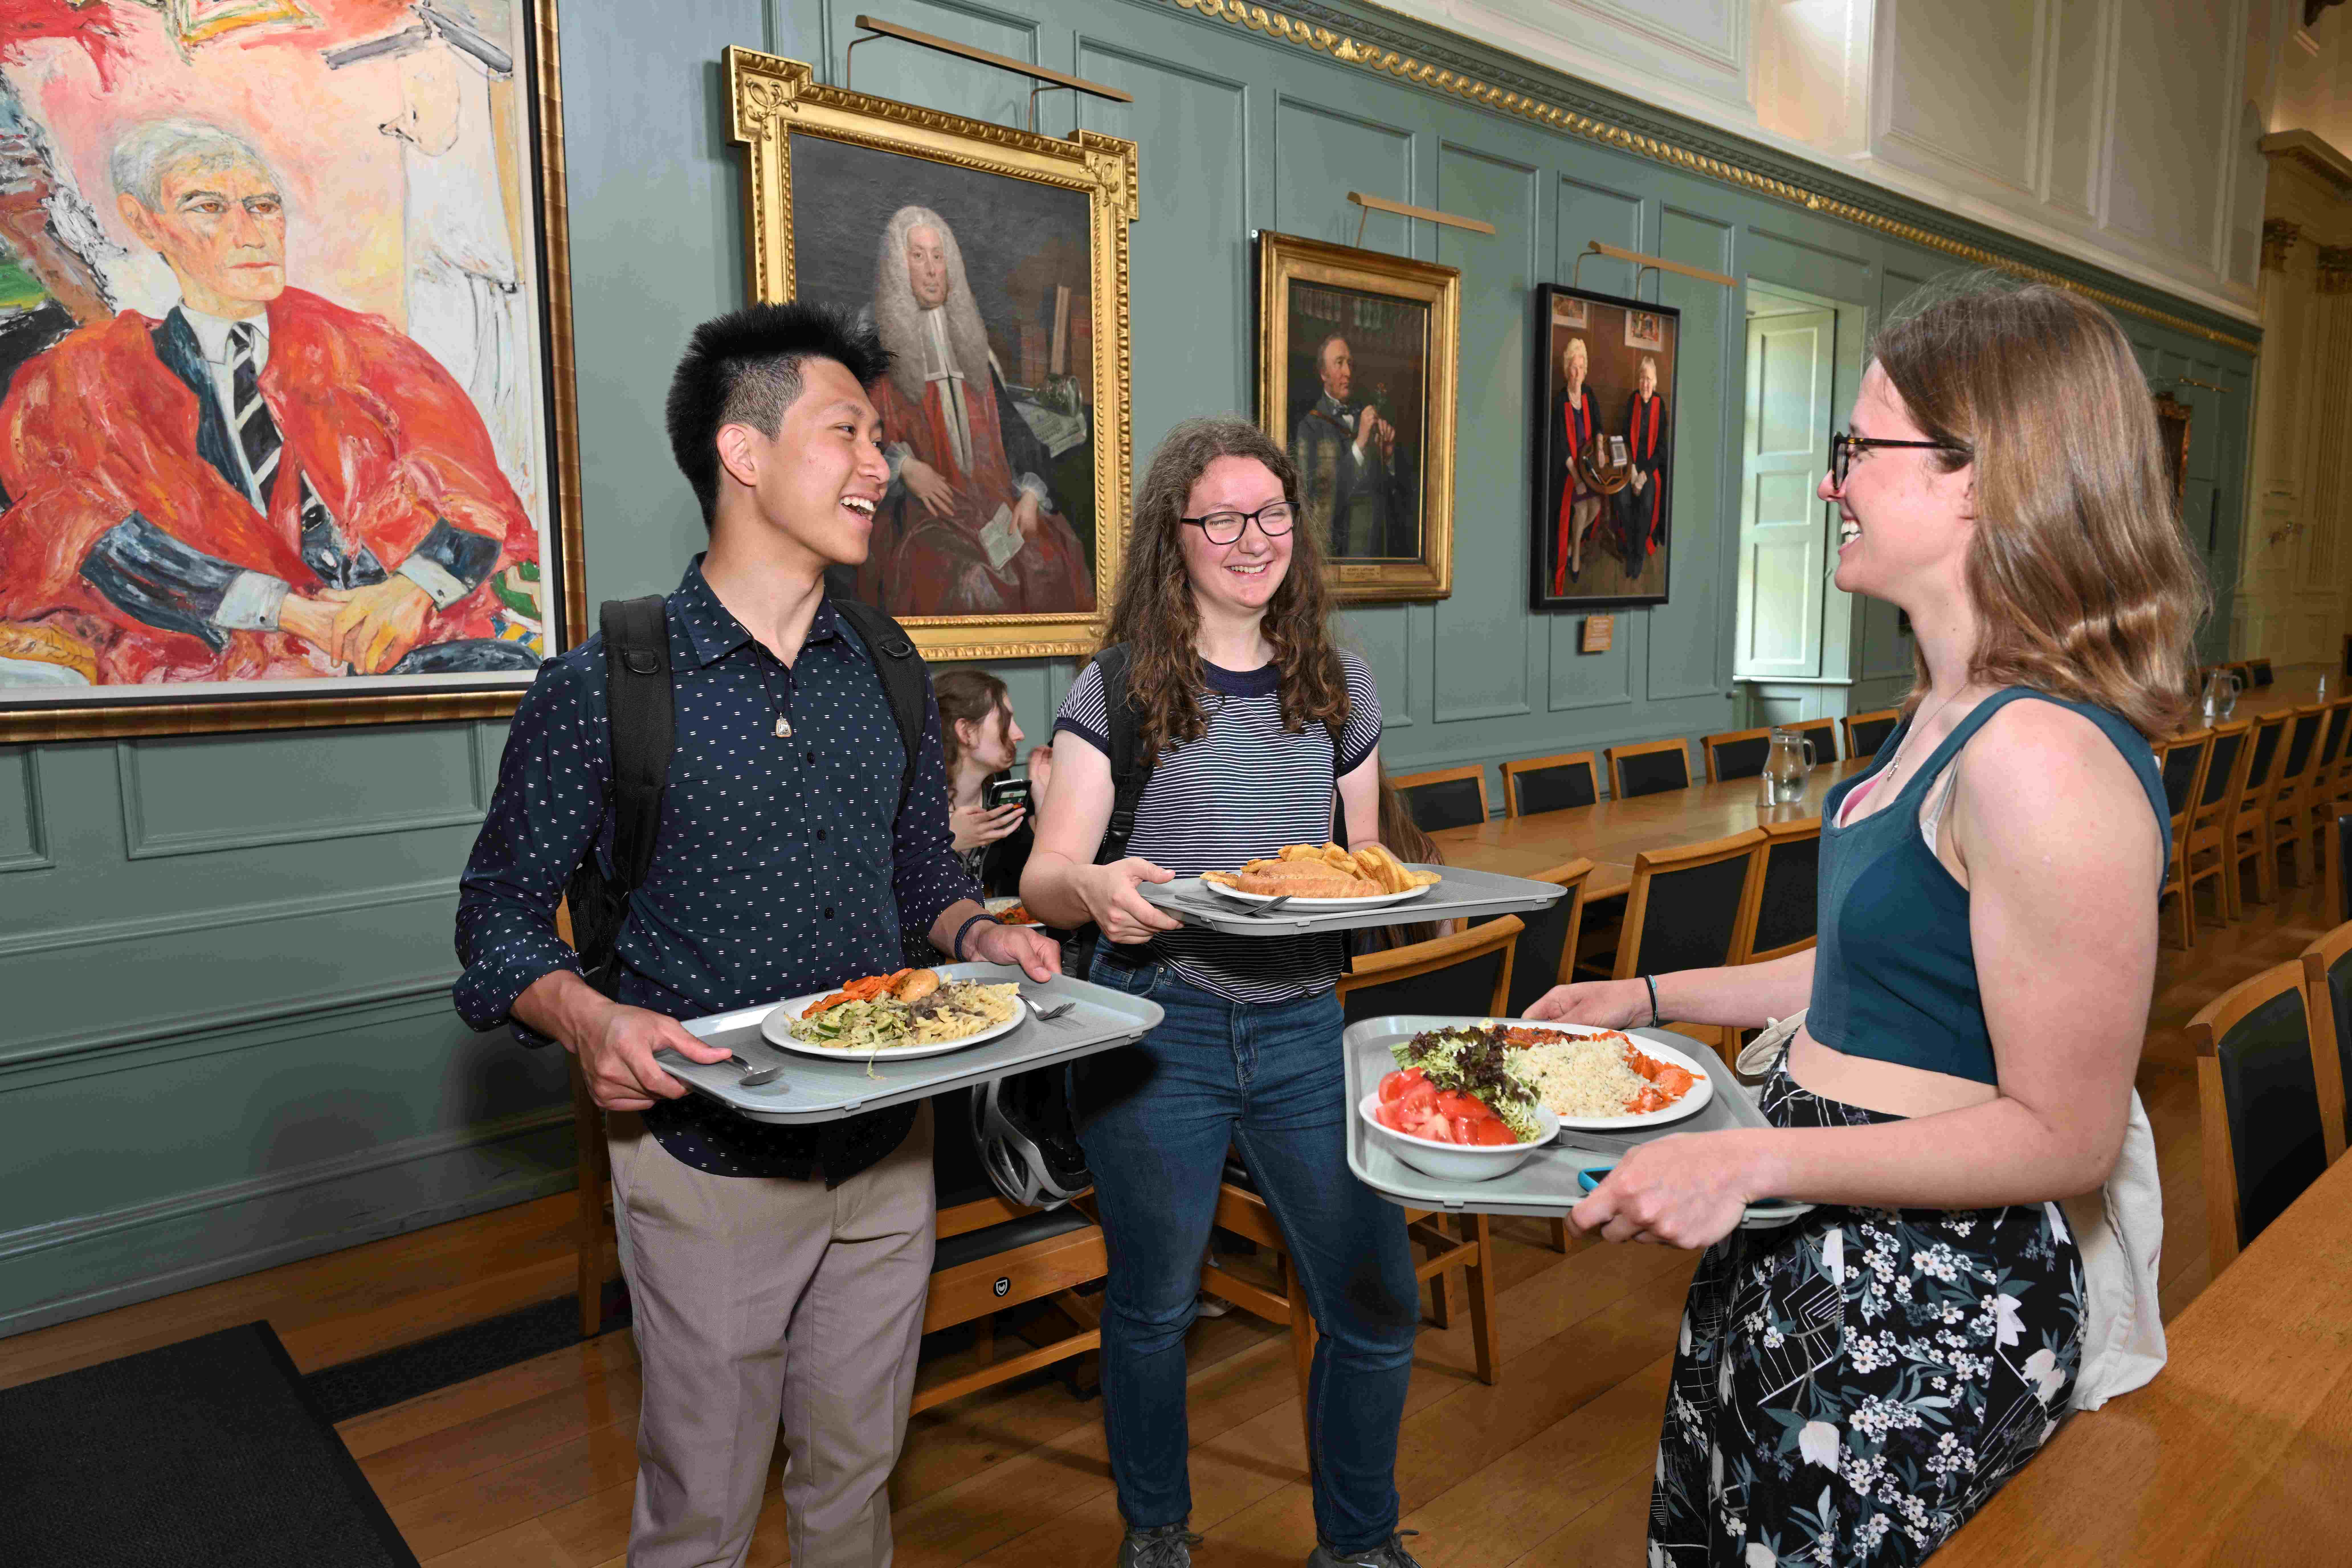 People smiling holding their food on trays in the dining hall at Trinity Hall, Cambridge.